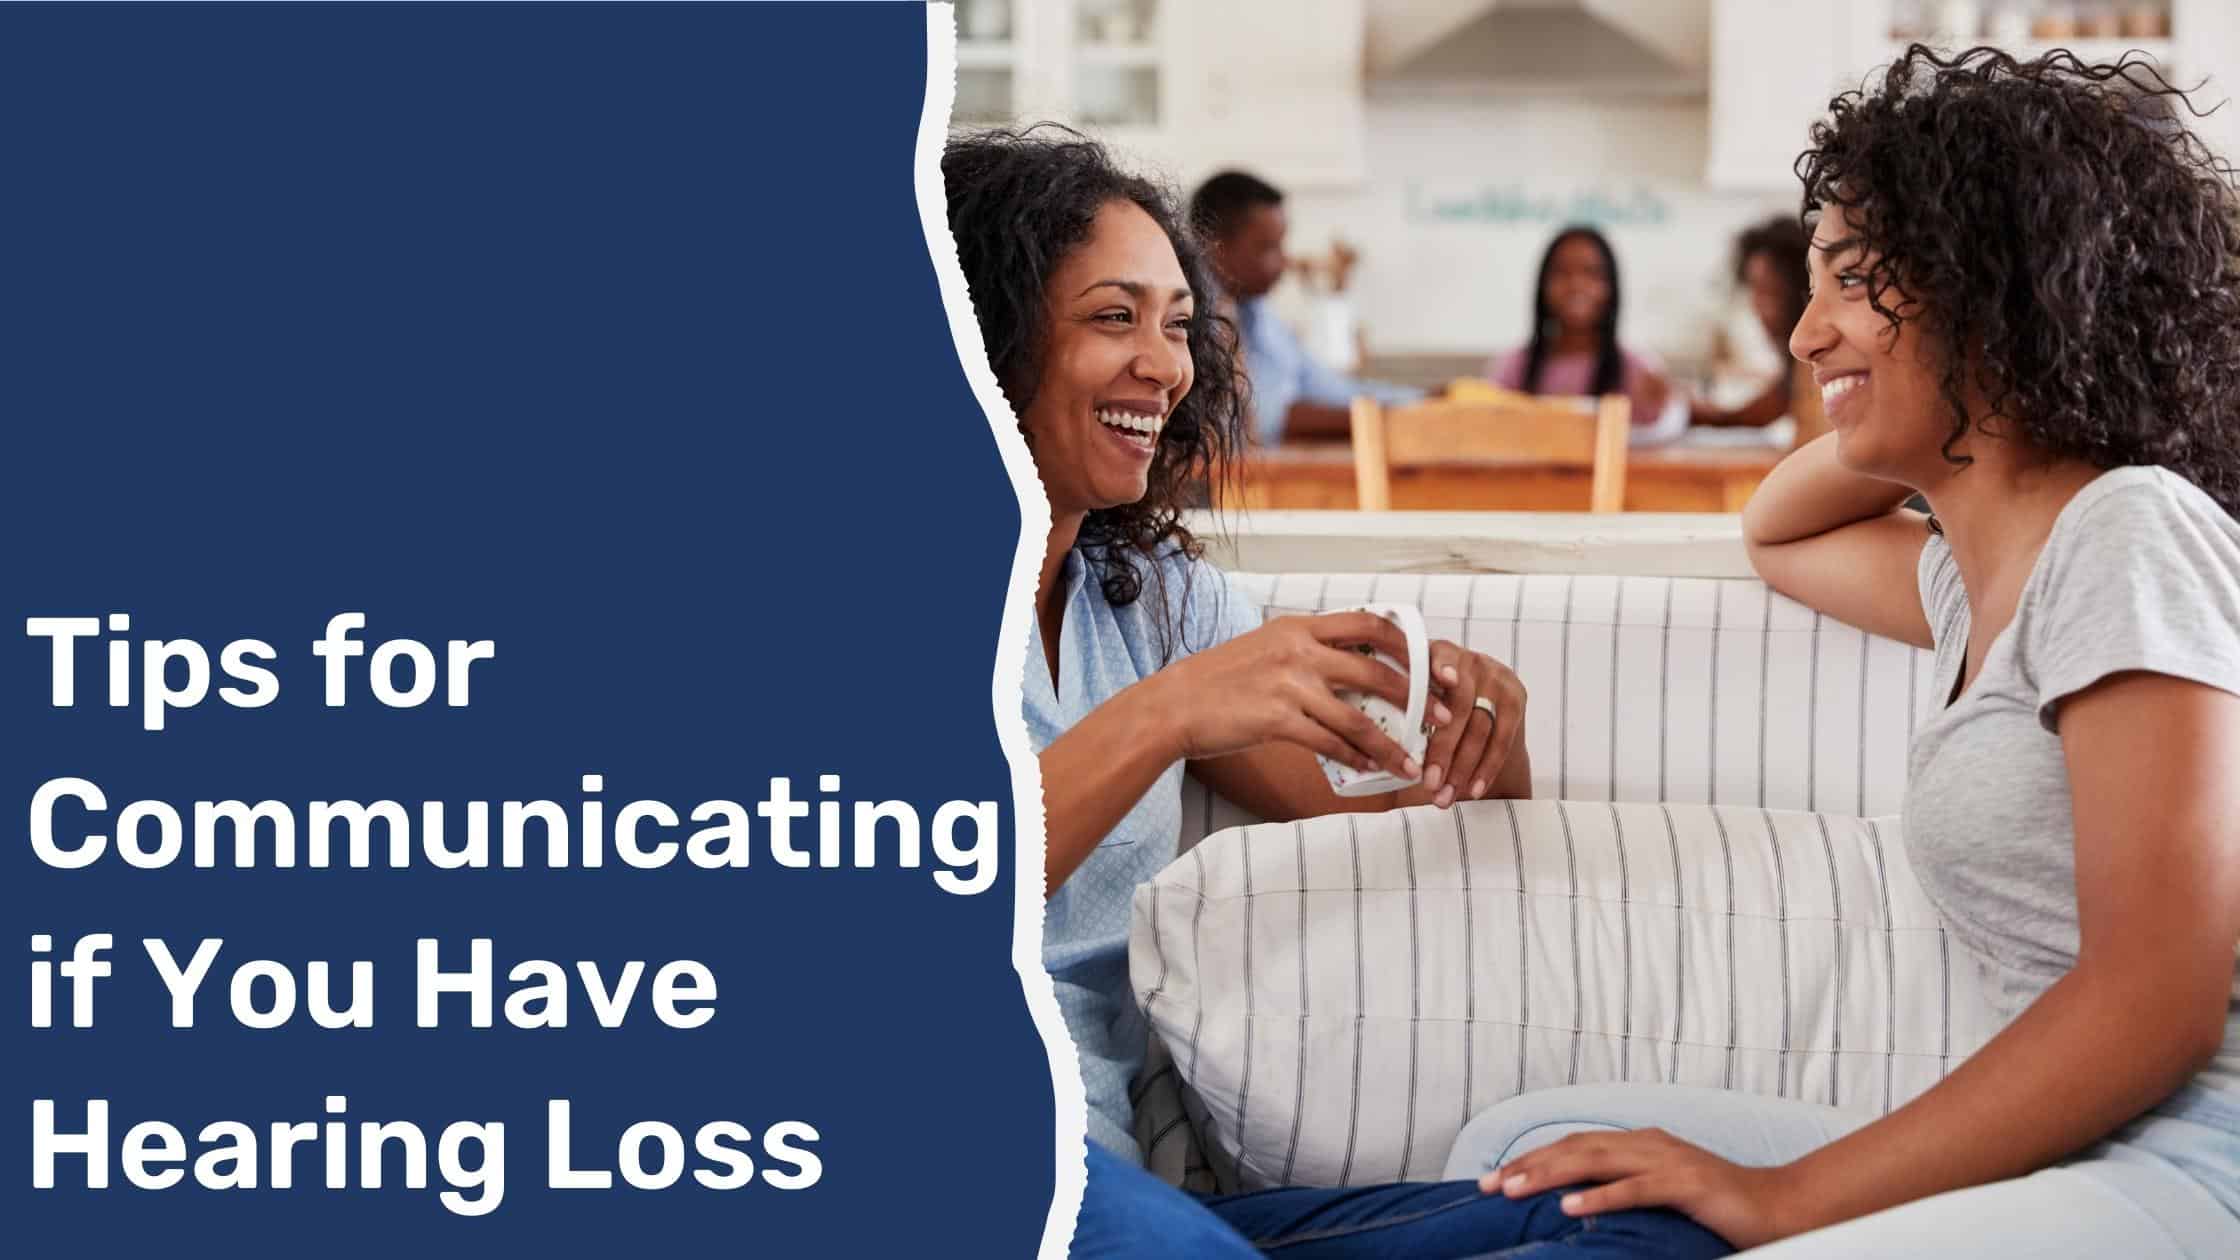 Featured image for “Tips for Communicating if You Have Hearing Loss       ”